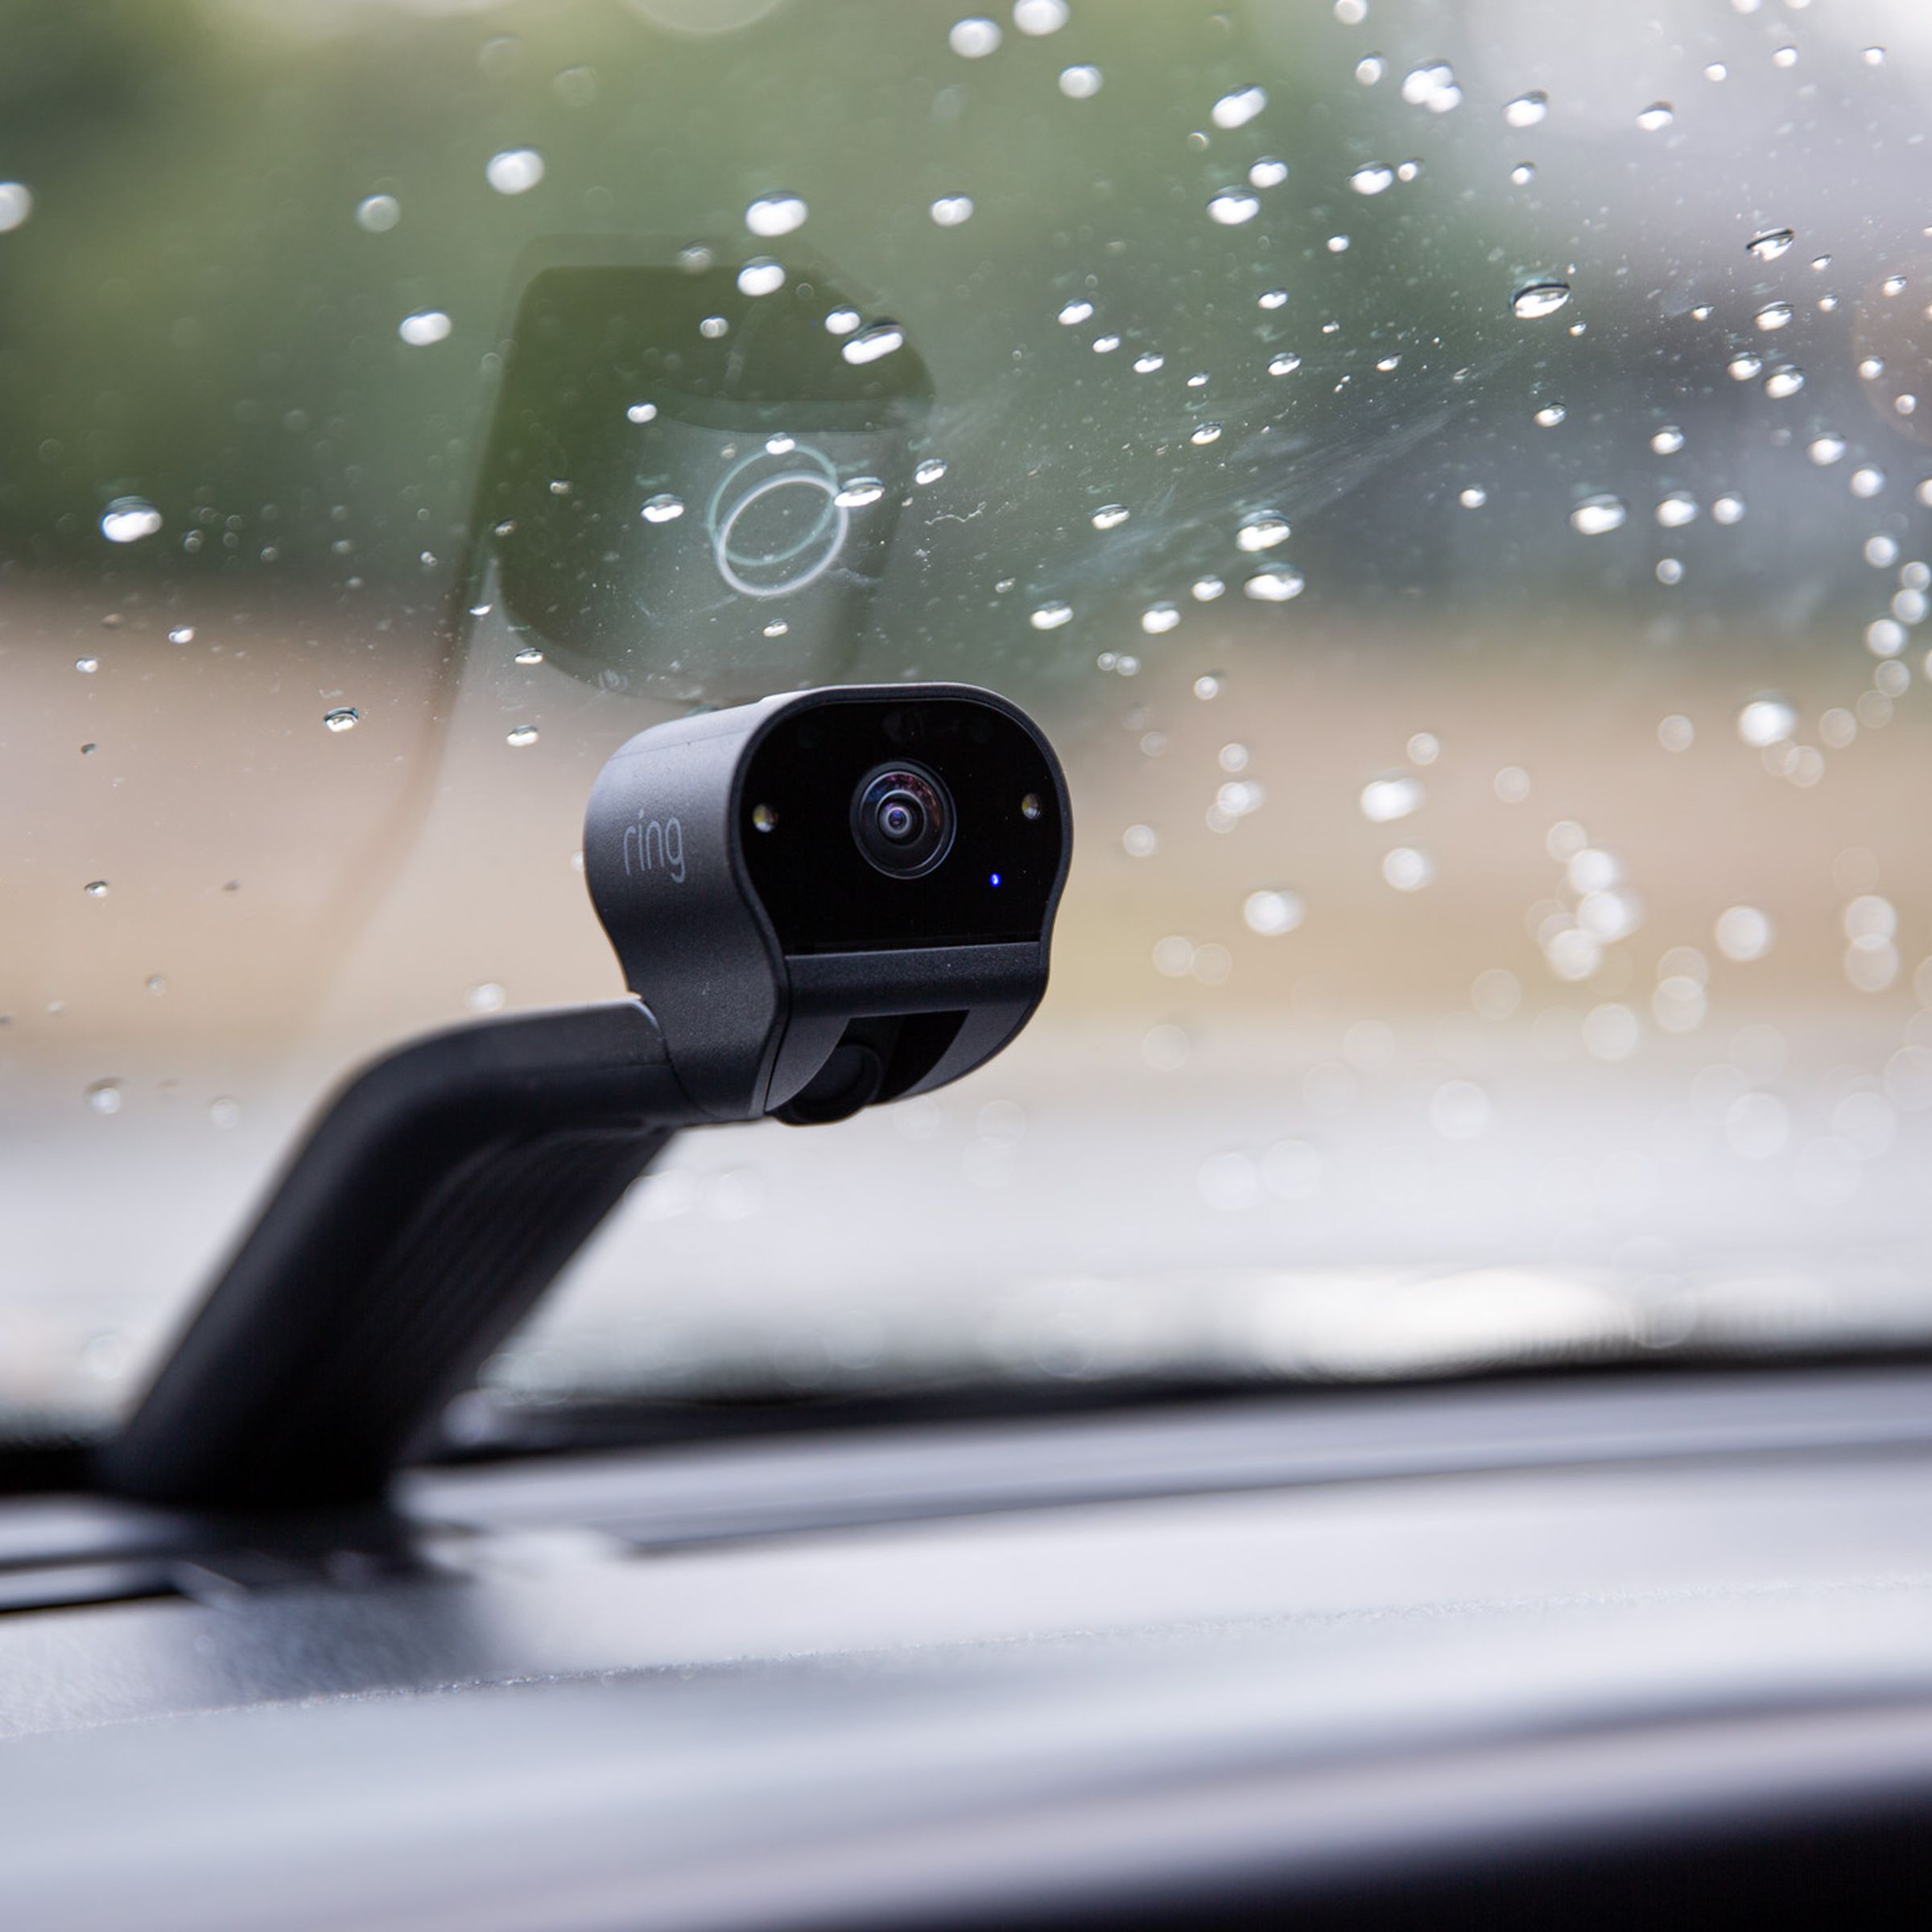 A small camera on top of a long black stand fitted onto a car windshield.